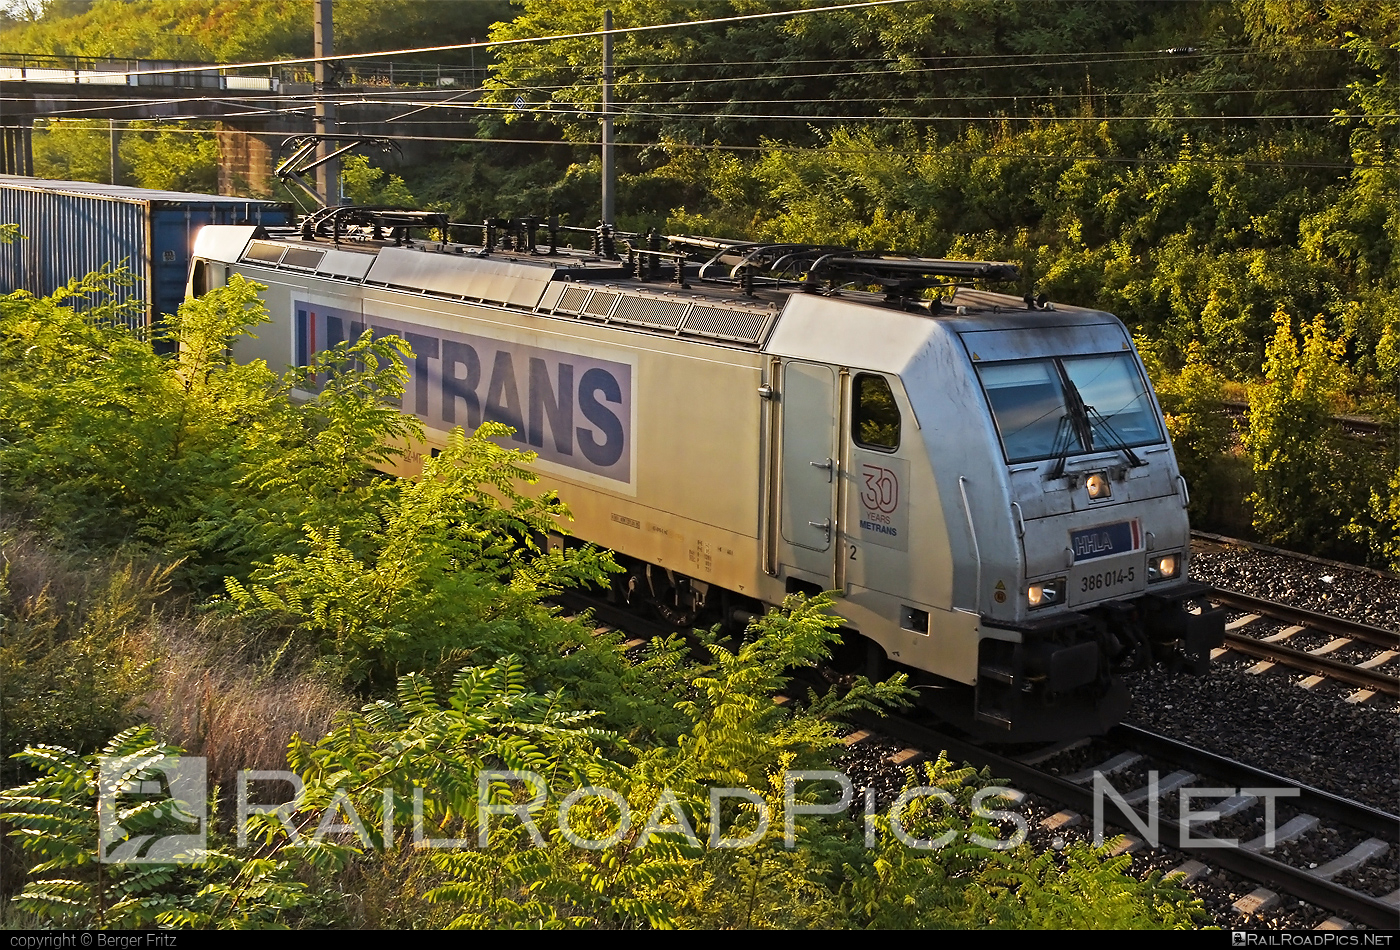 Bombardier TRAXX F140 MS - 386 014-5 operated by METRANS Rail s.r.o. #bombardier #bombardiertraxx #hhla #metrans #metransrail #traxx #traxxf140 #traxxf140ms